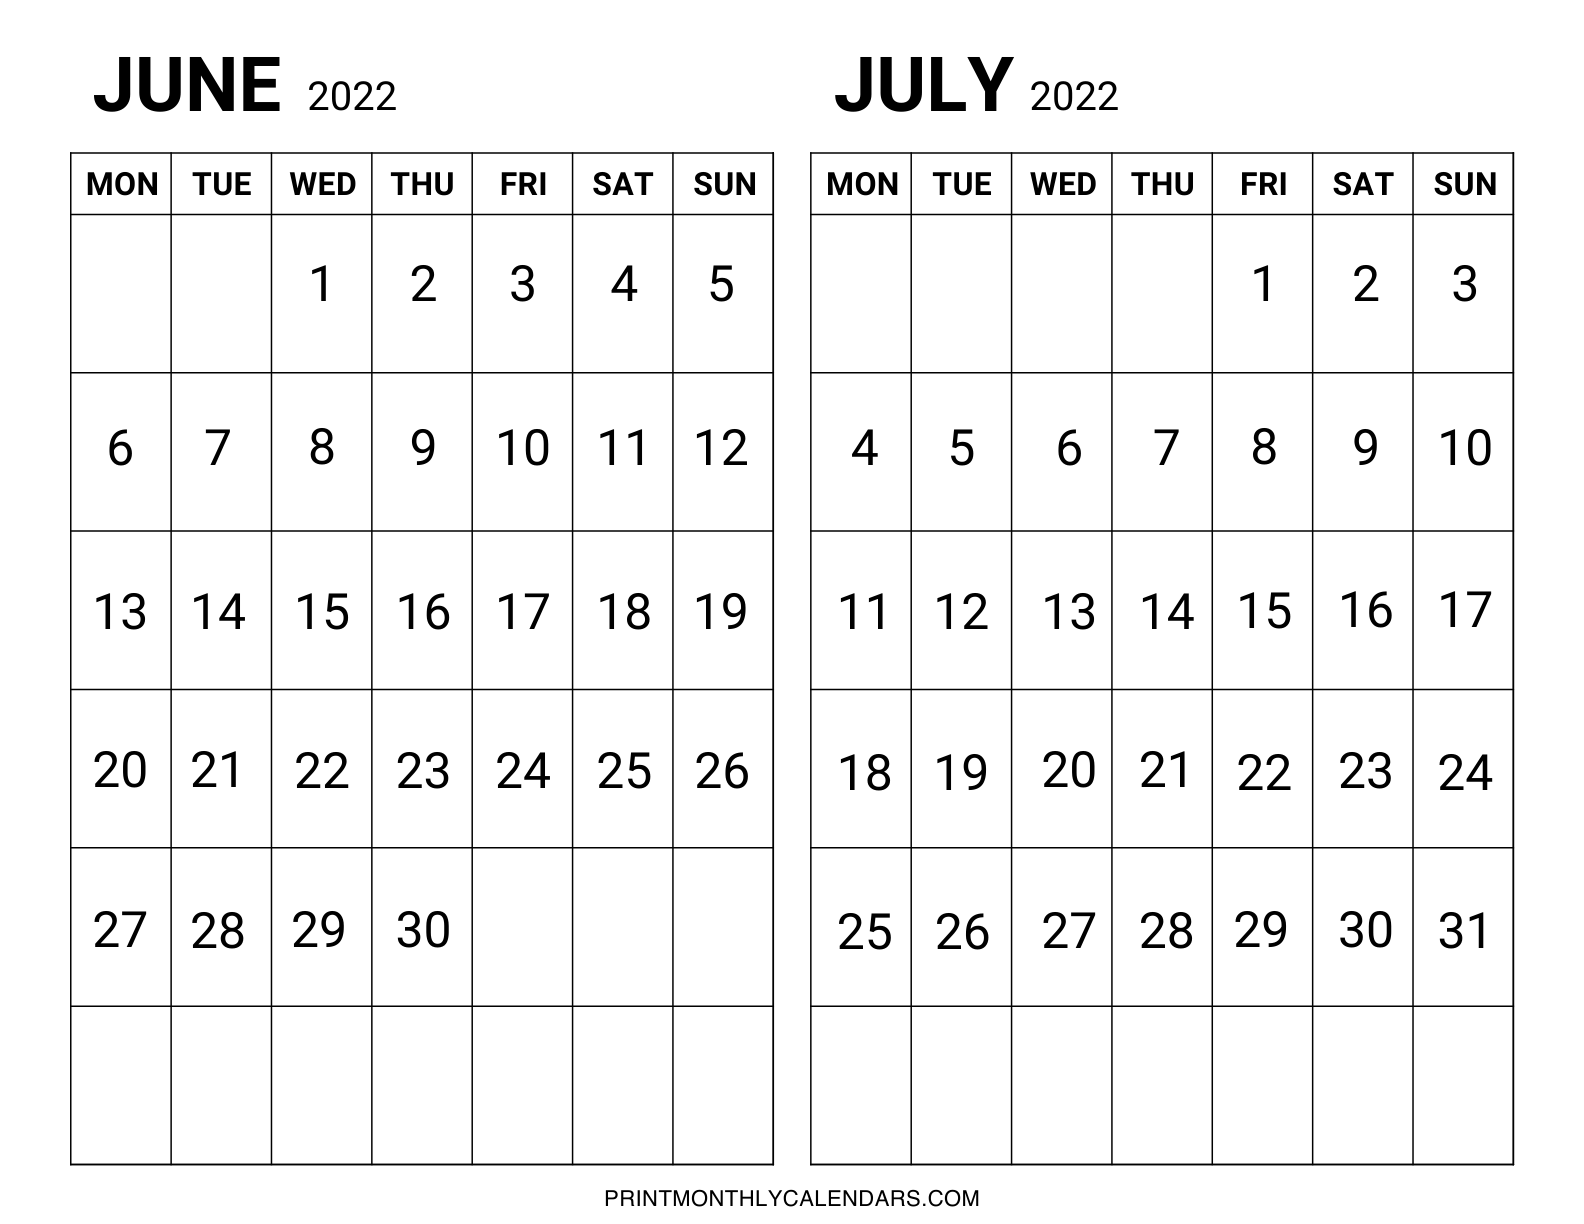 The June and July 2022 two-month calendar template is created in a horizontal layout on one page. Monday is the first day of the week on the calendar.